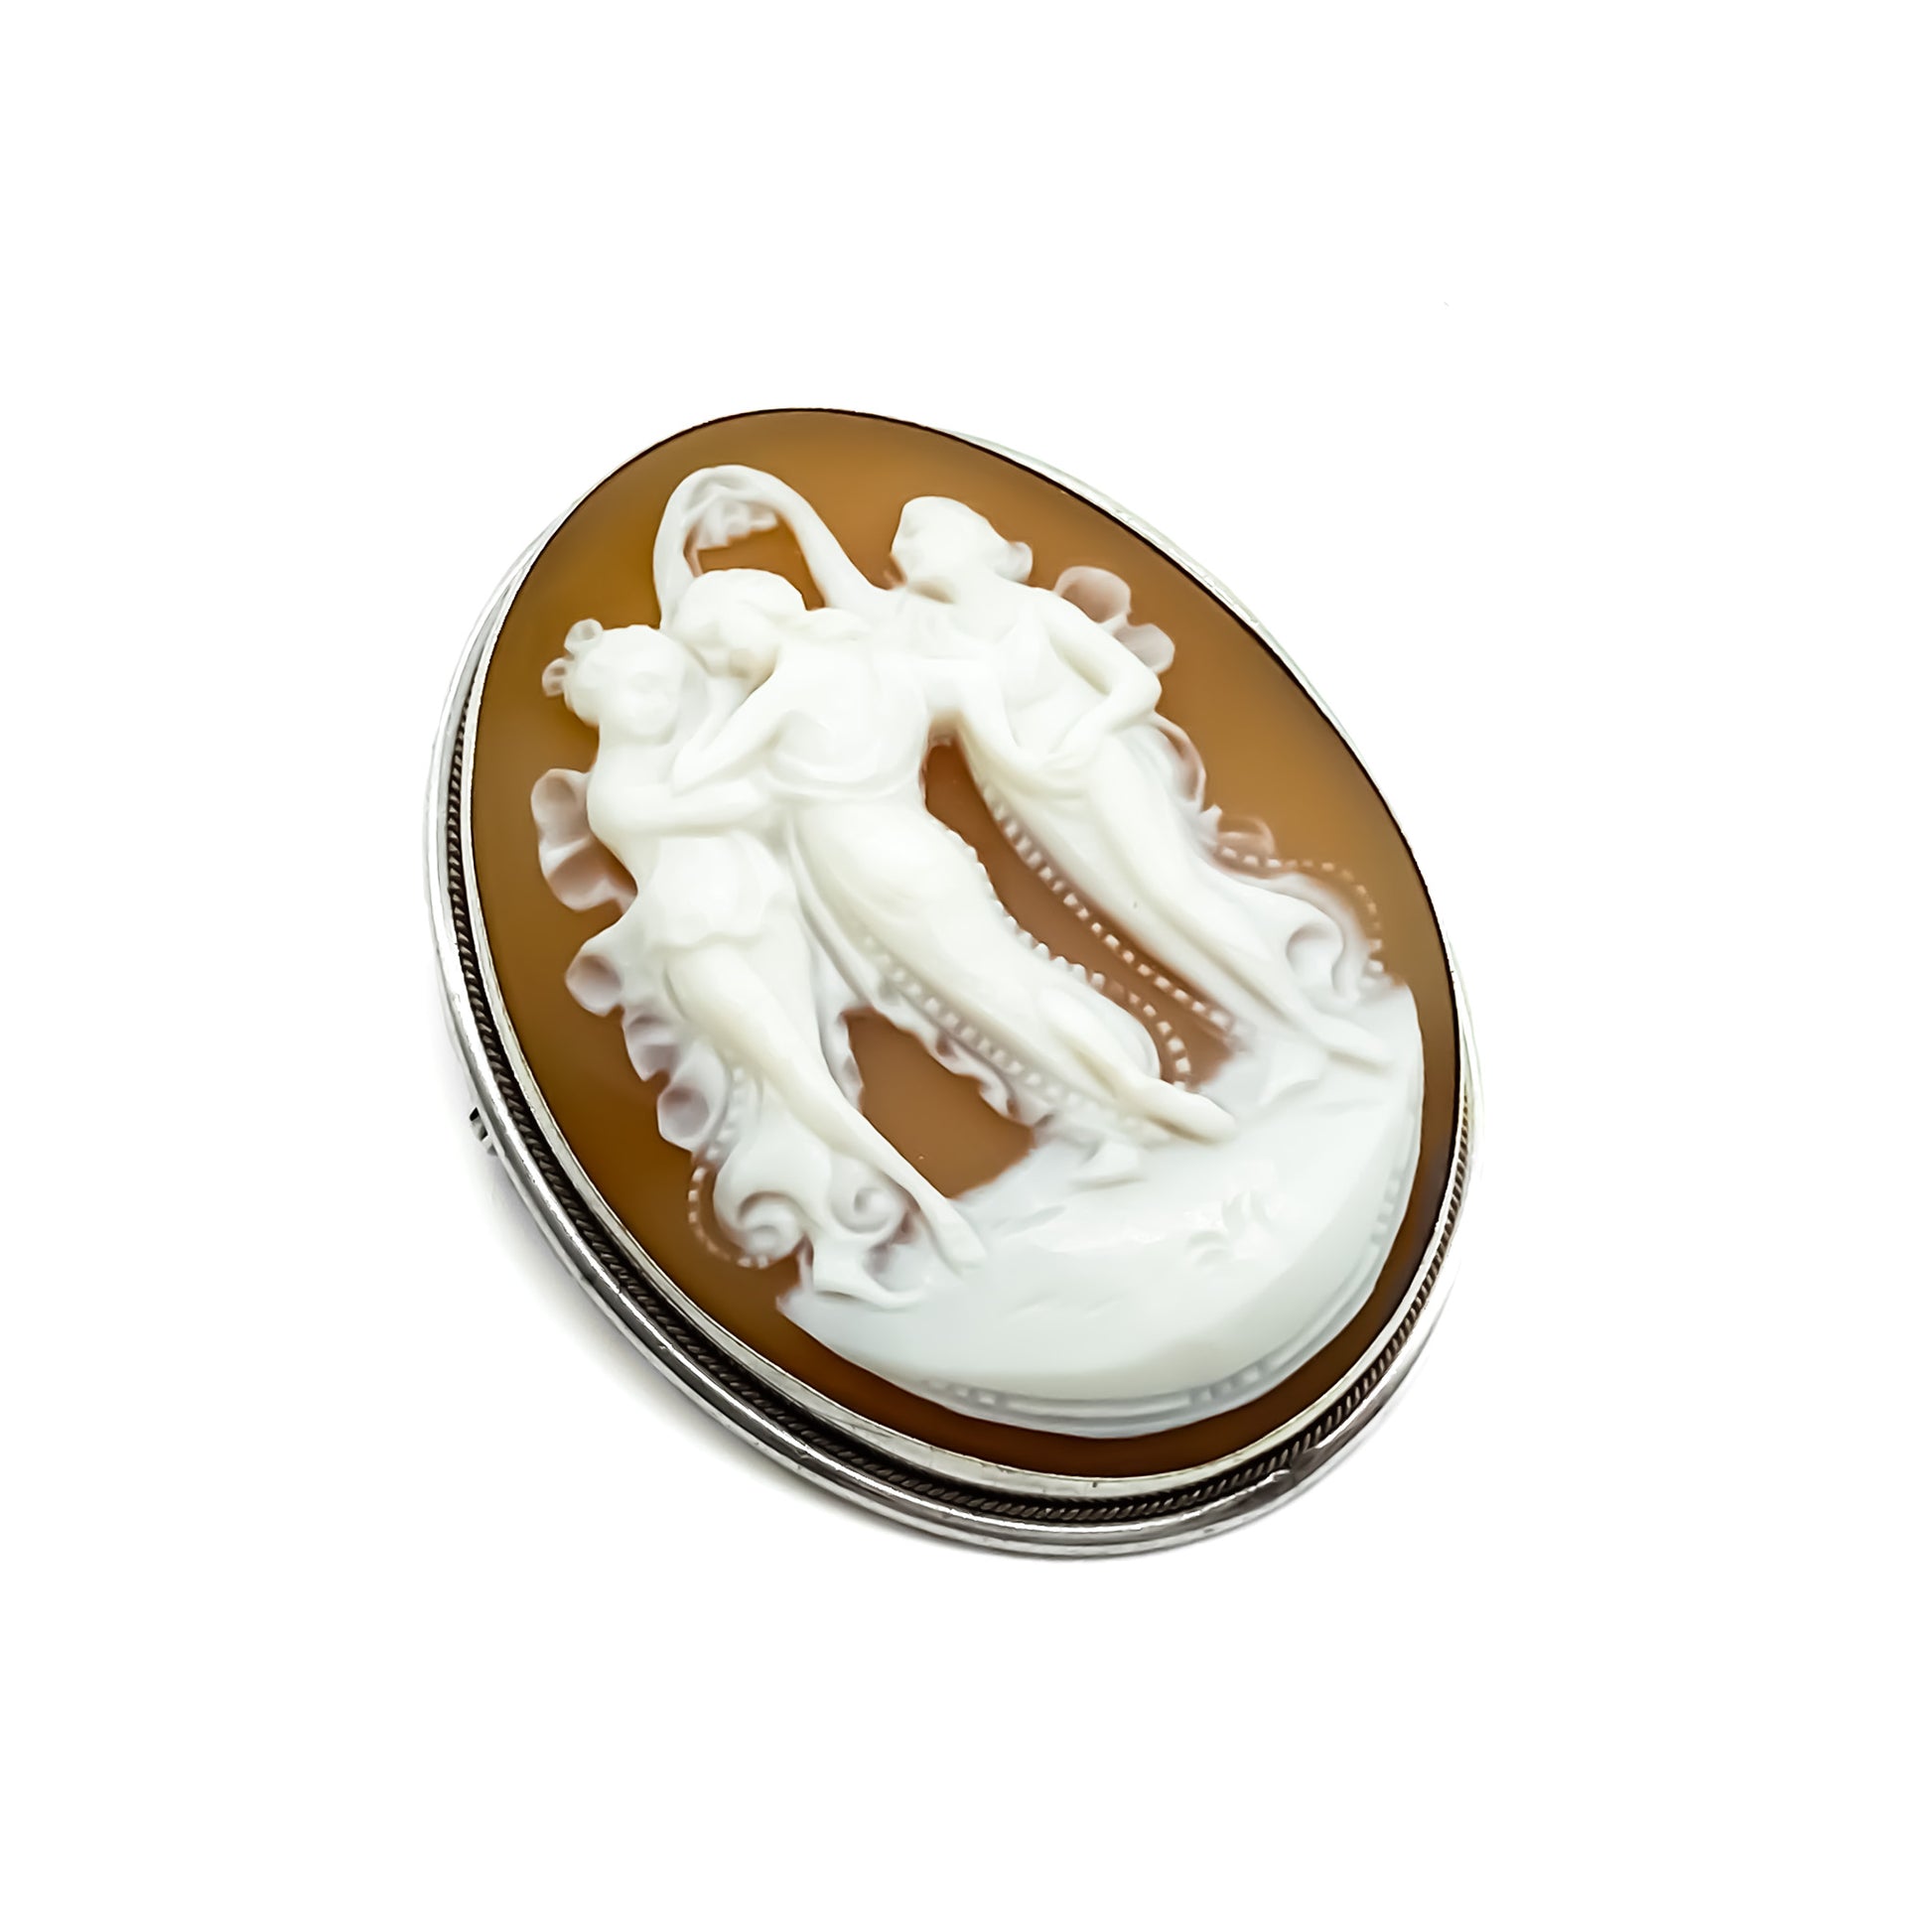 Beautiful three graces cameo brooch/pendant set in a silver frame.